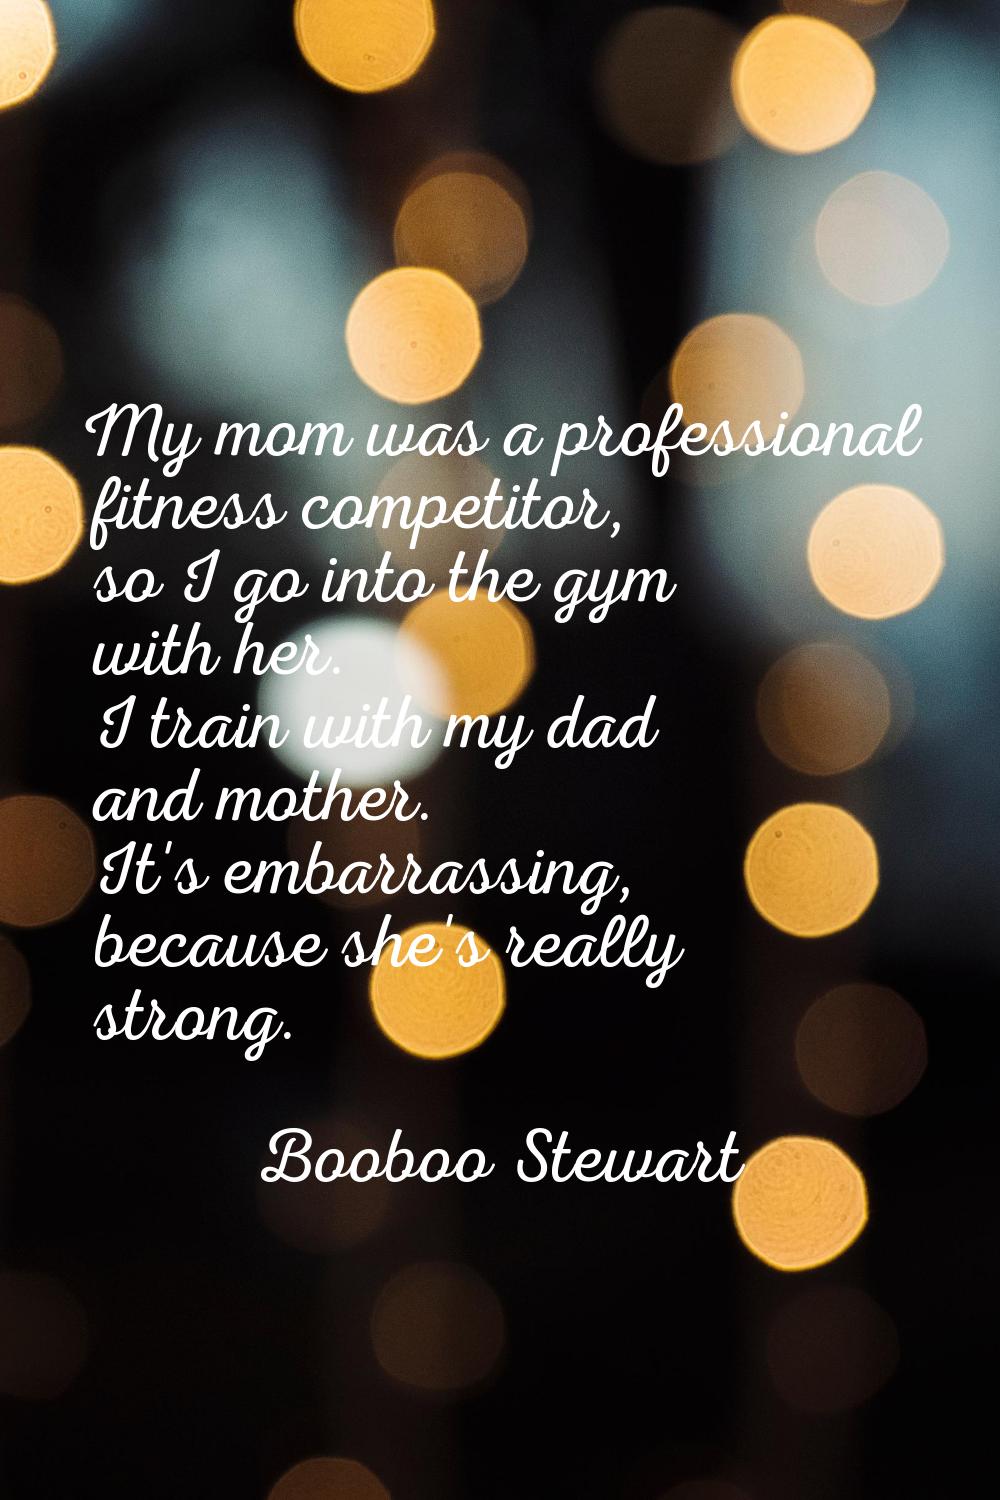 My mom was a professional fitness competitor, so I go into the gym with her. I train with my dad an